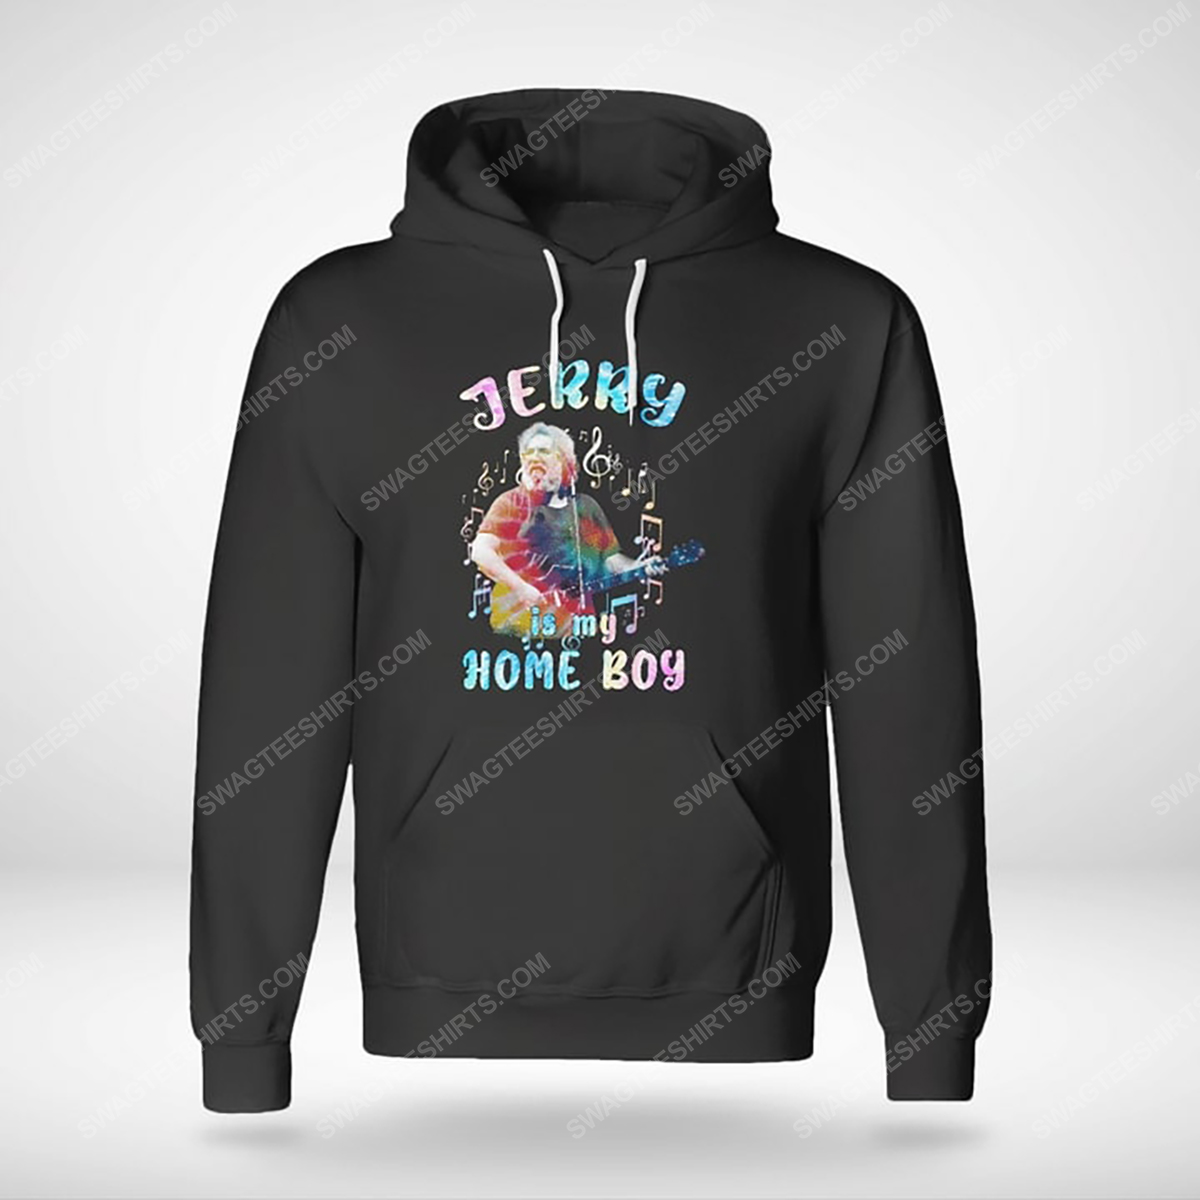 Jerry is my home boy grateful dead rock band hoodie(1)